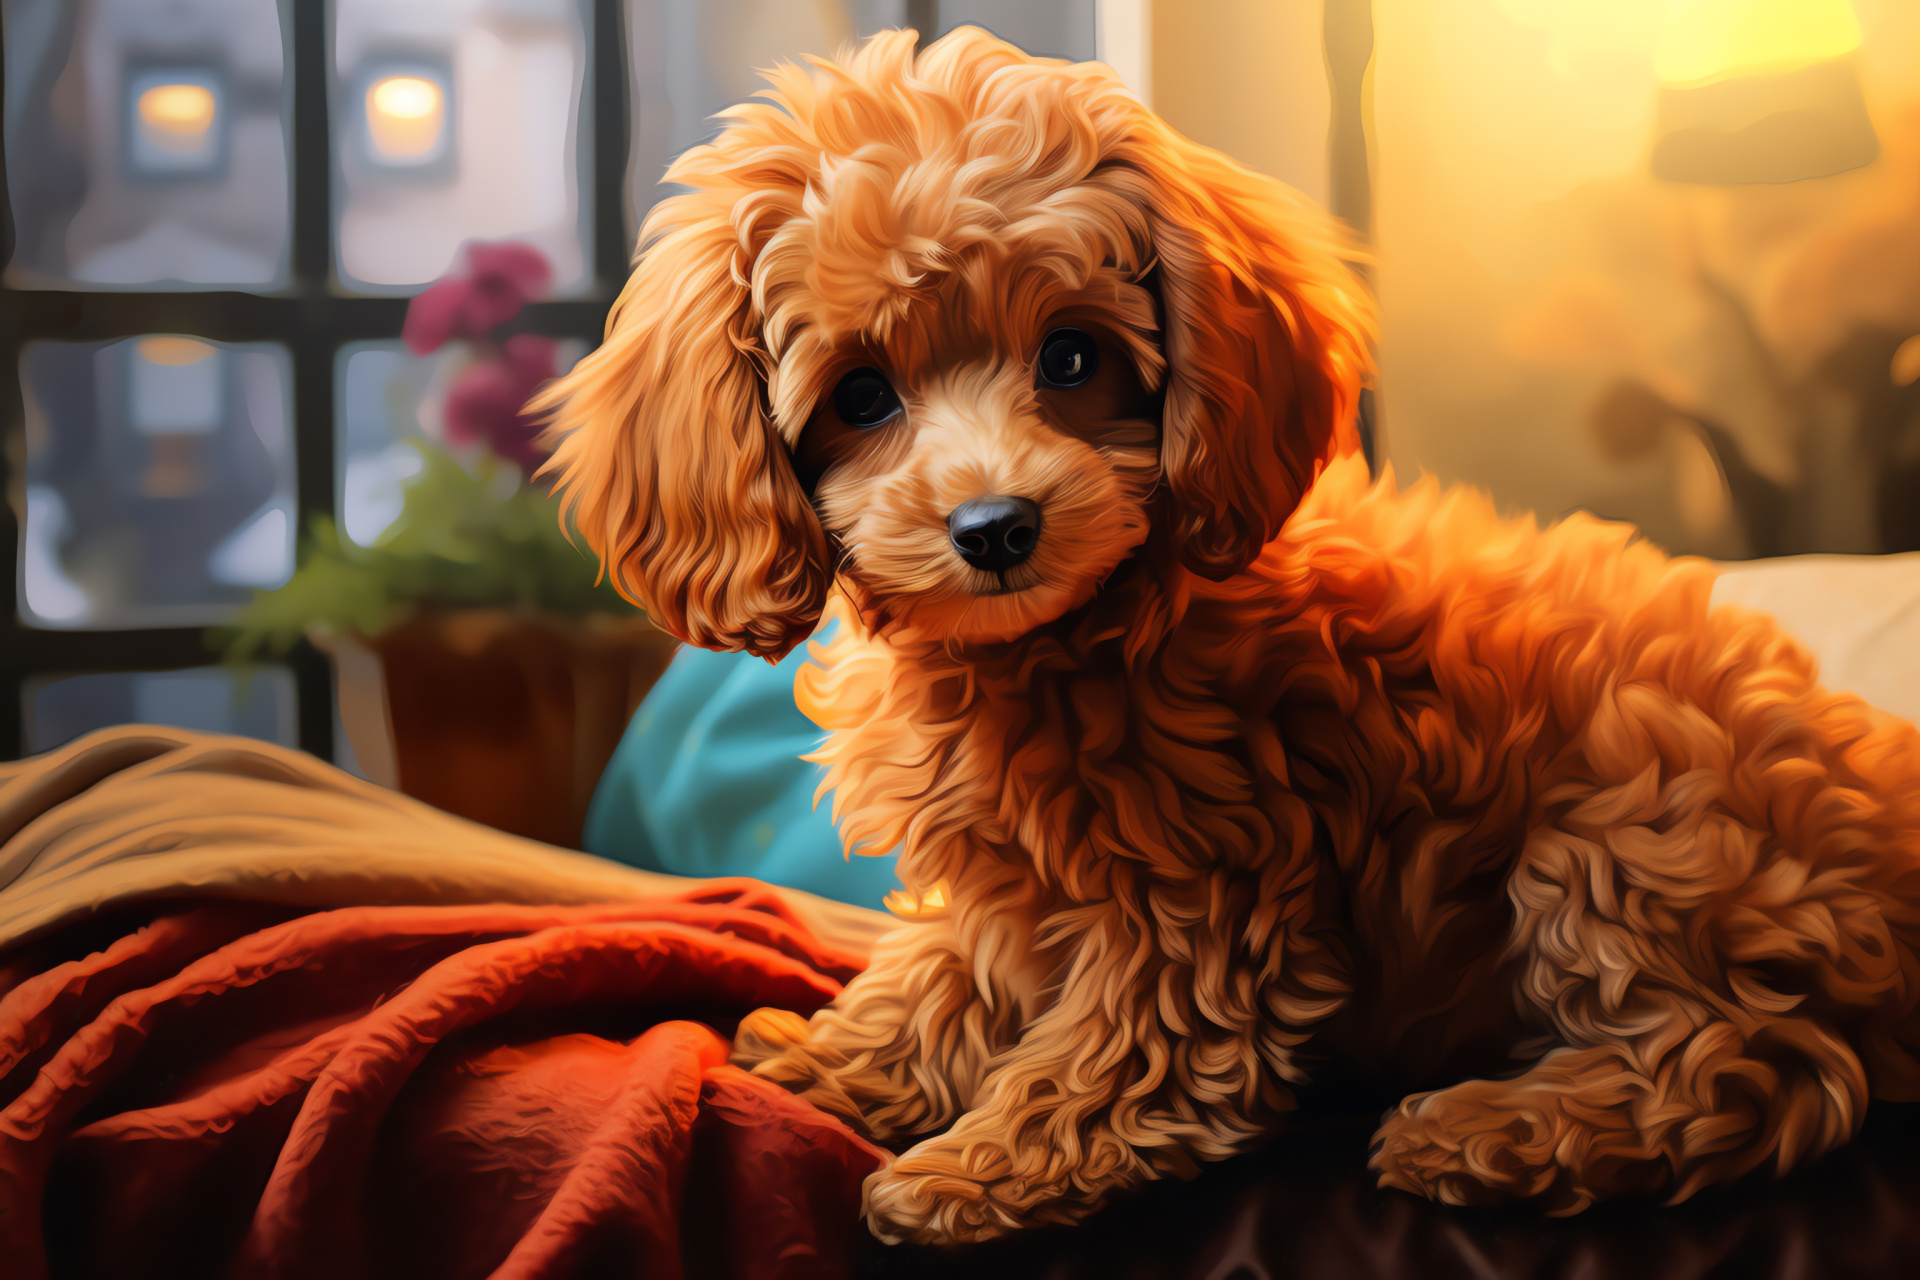 Toy Poodle indoors, Miniature canine, Red fur pet, Household environment, Playful demeanor, HD Desktop Wallpaper